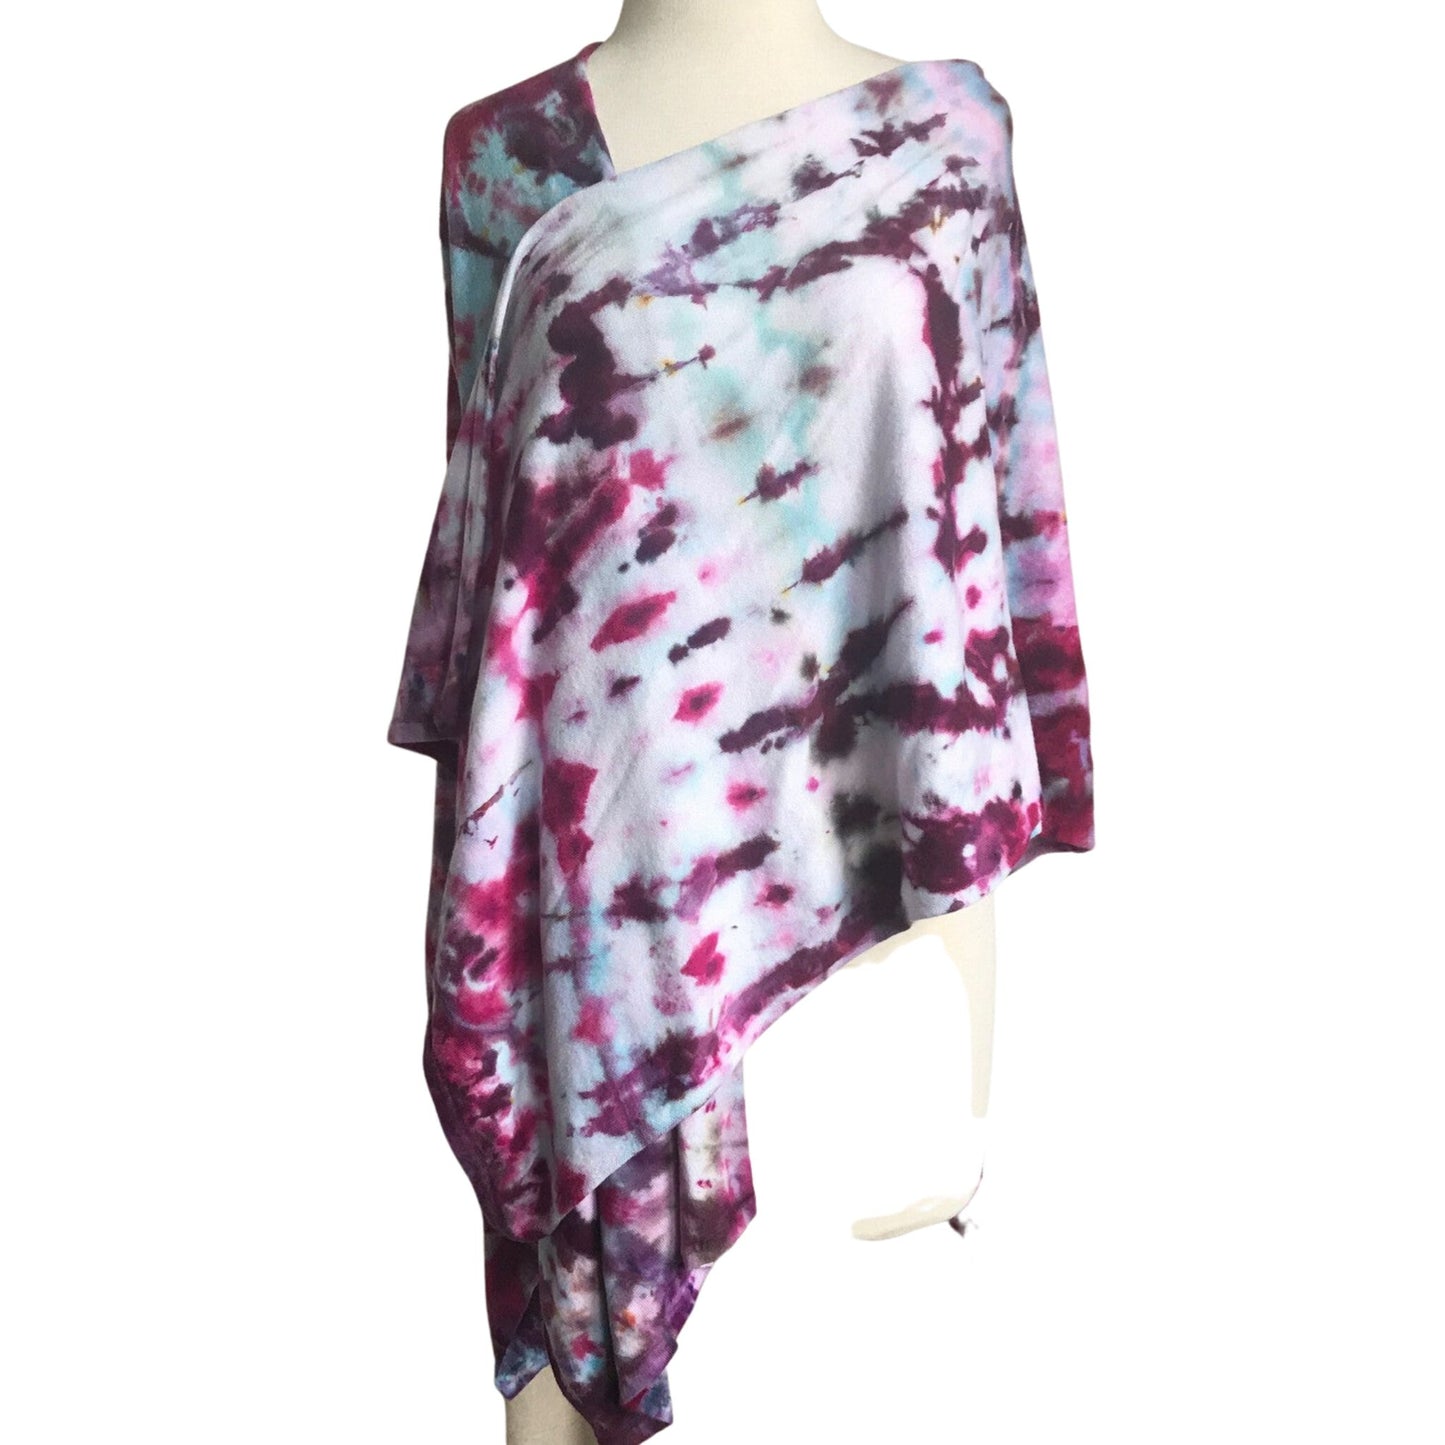 Front View of a Tie Dye Shawl wrapped around a dressform. The colors are turuoise and magenta in abstract irregular lines